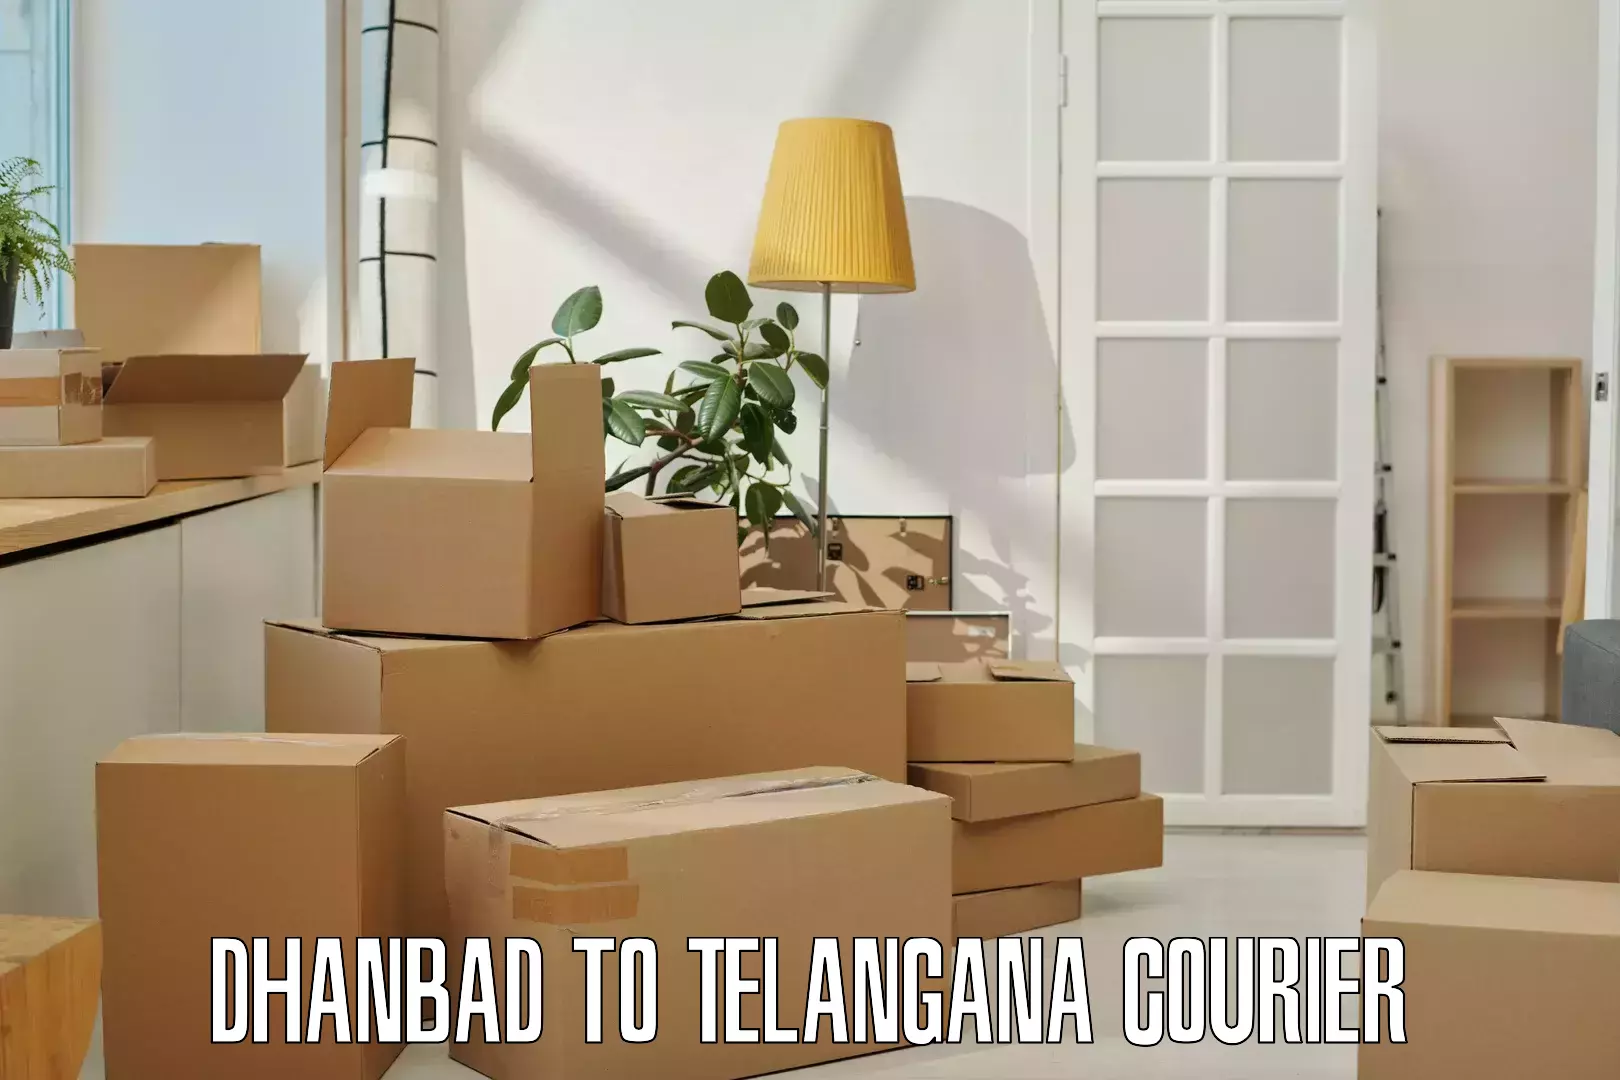 Courier services in Dhanbad to Zahirabad